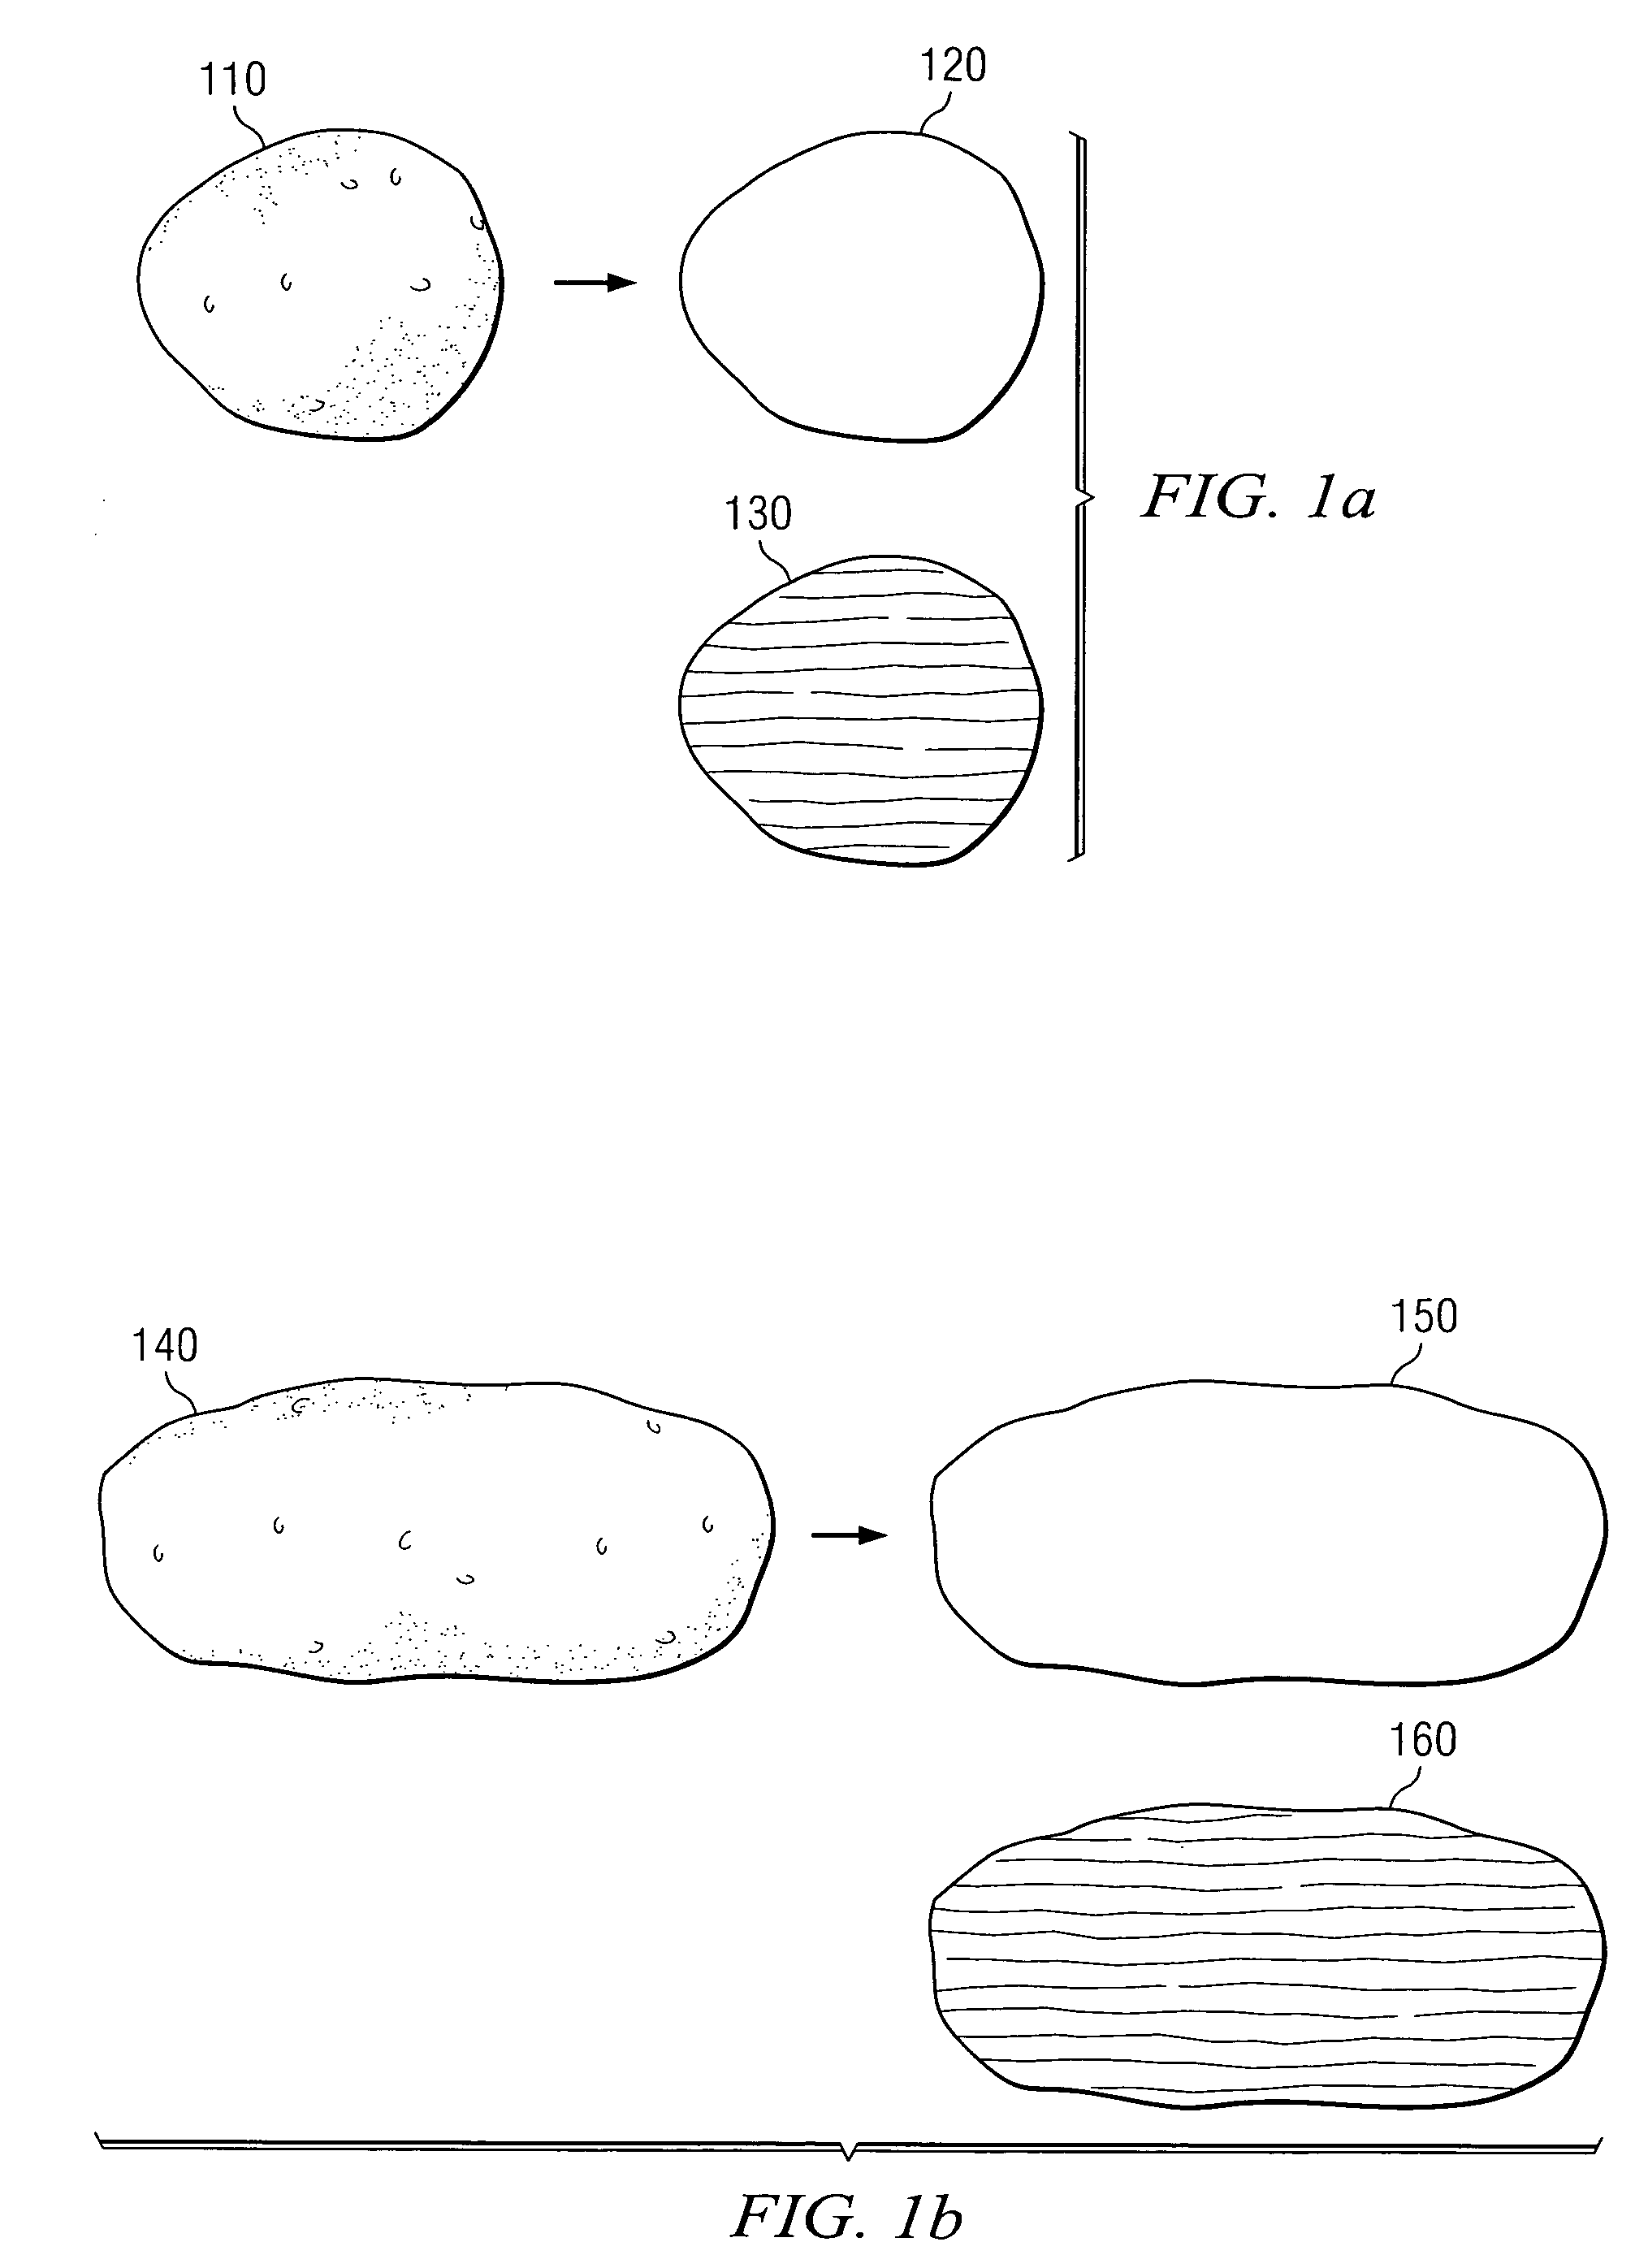 System for conveying and slicing